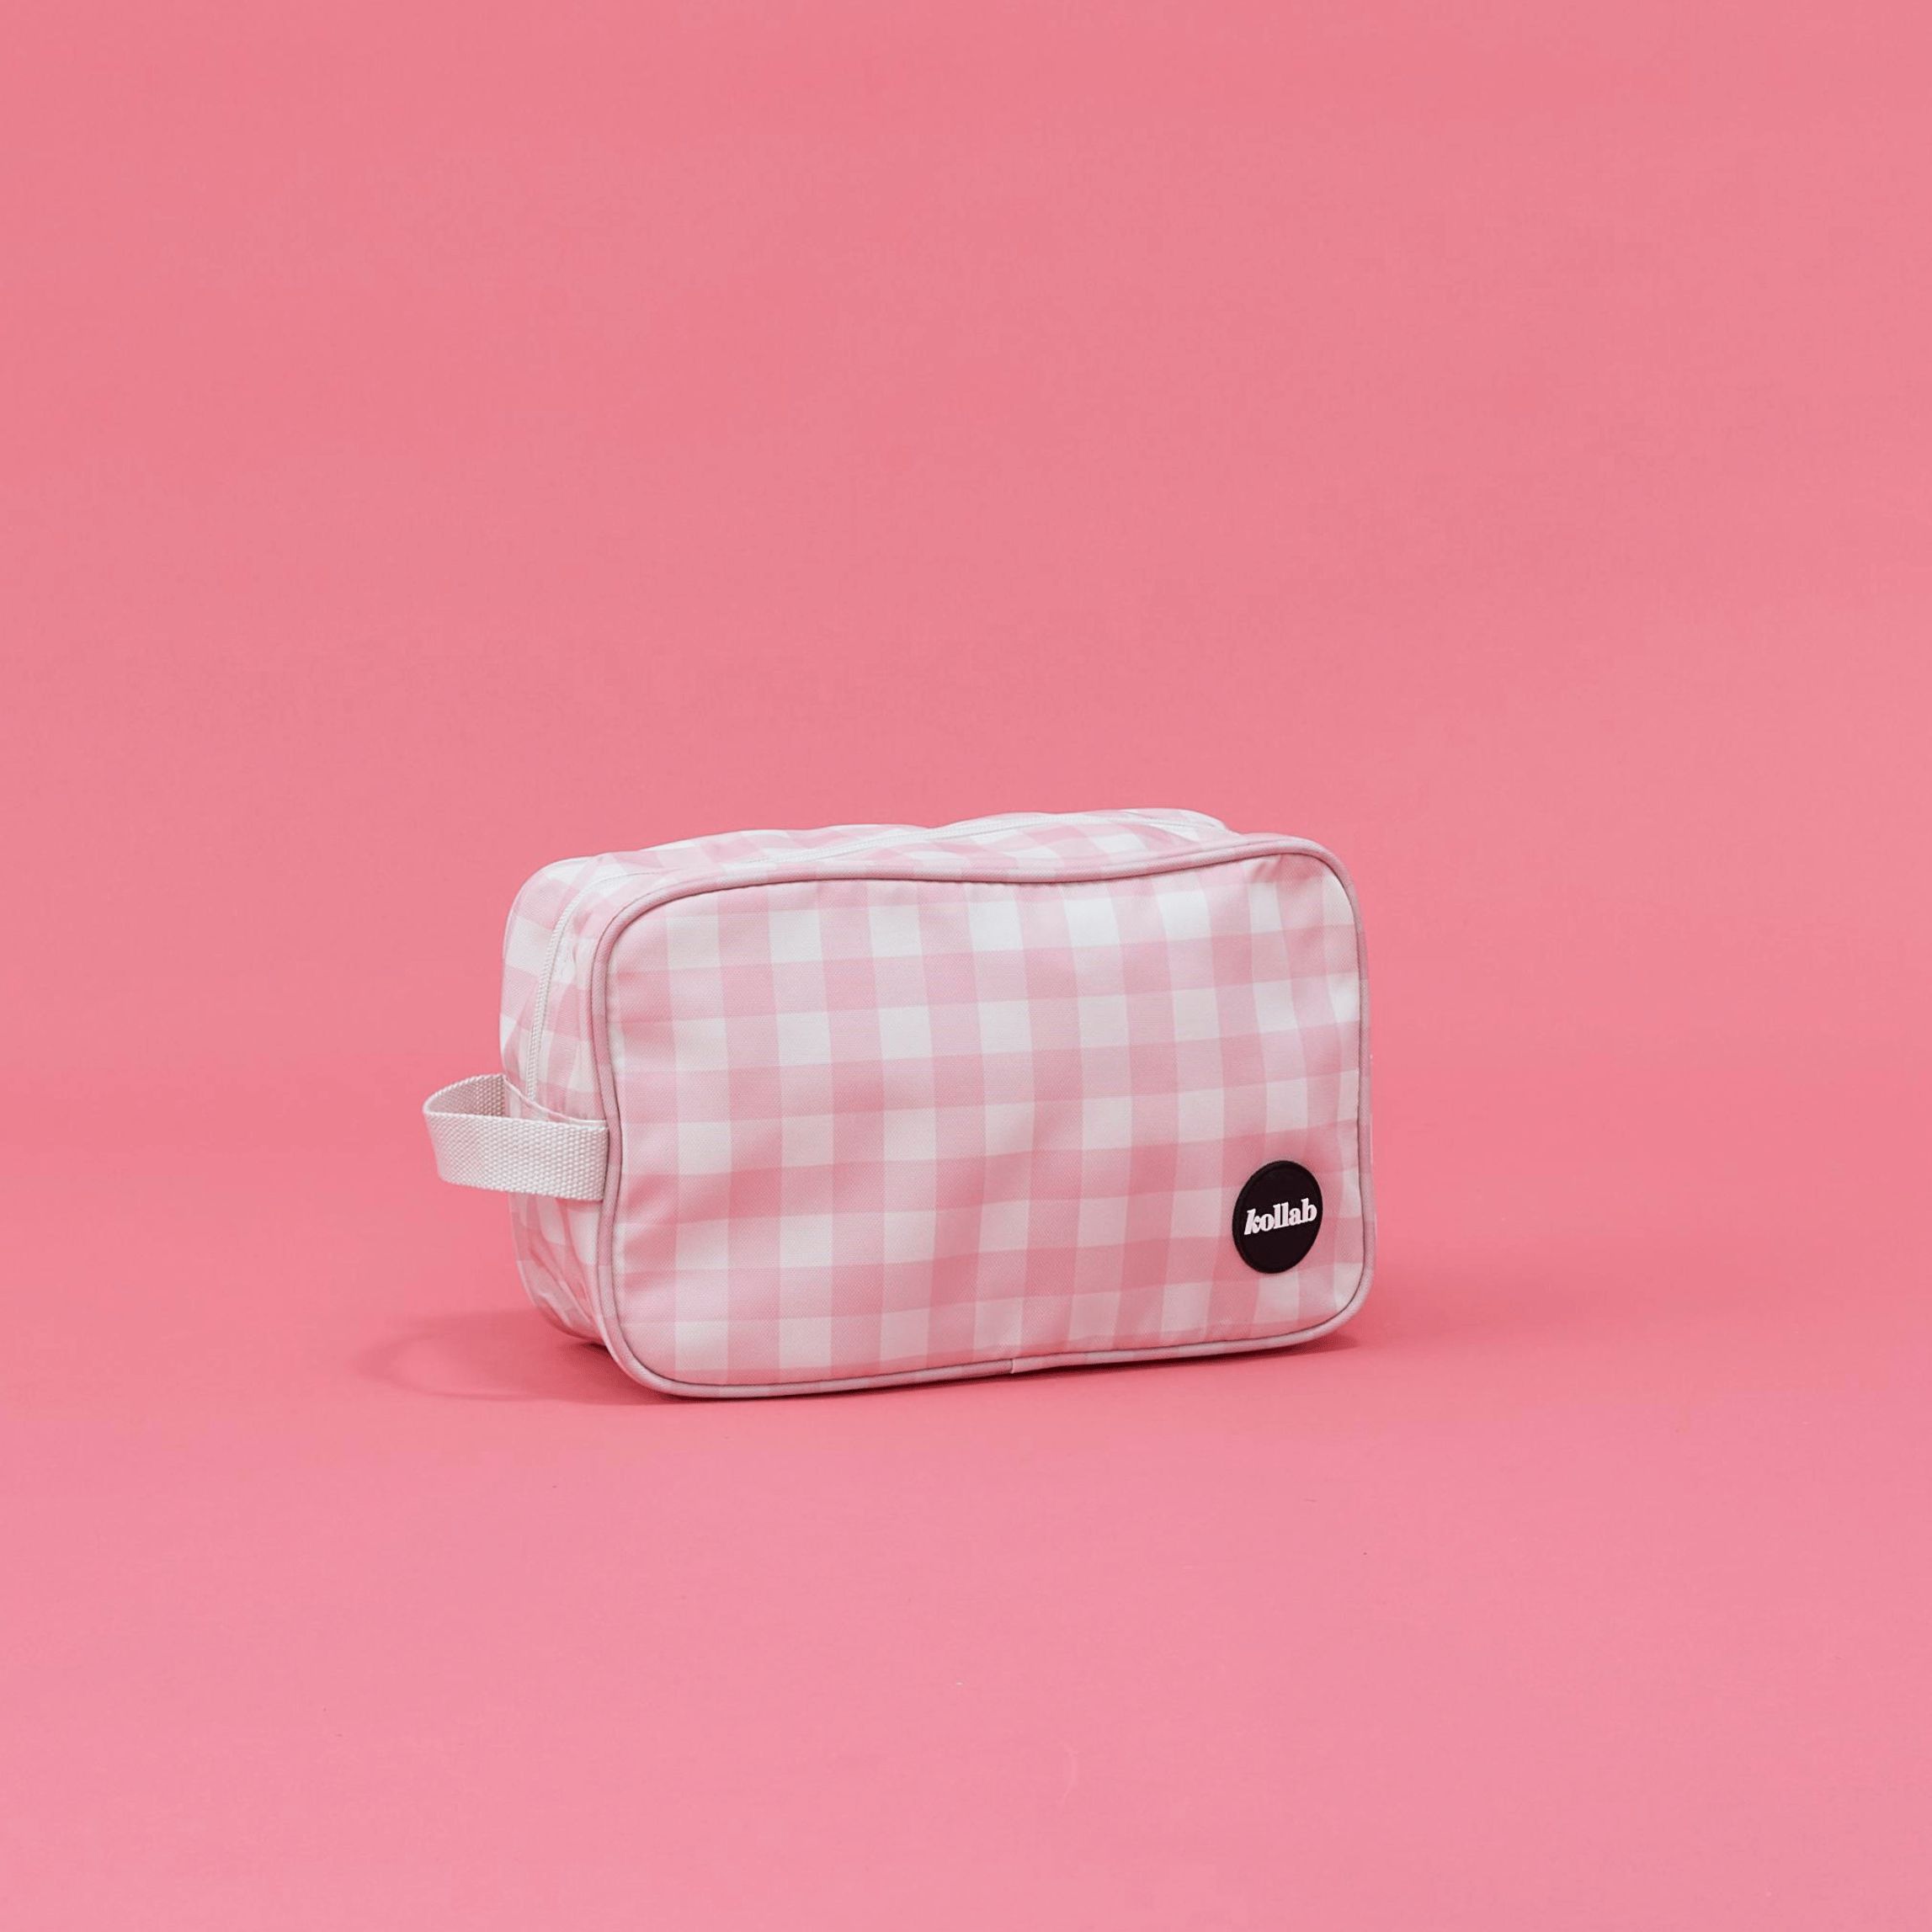 Holiday Travel Bag Candy Pink Check-Travel & Outdoors-Kollab-The Bay Room